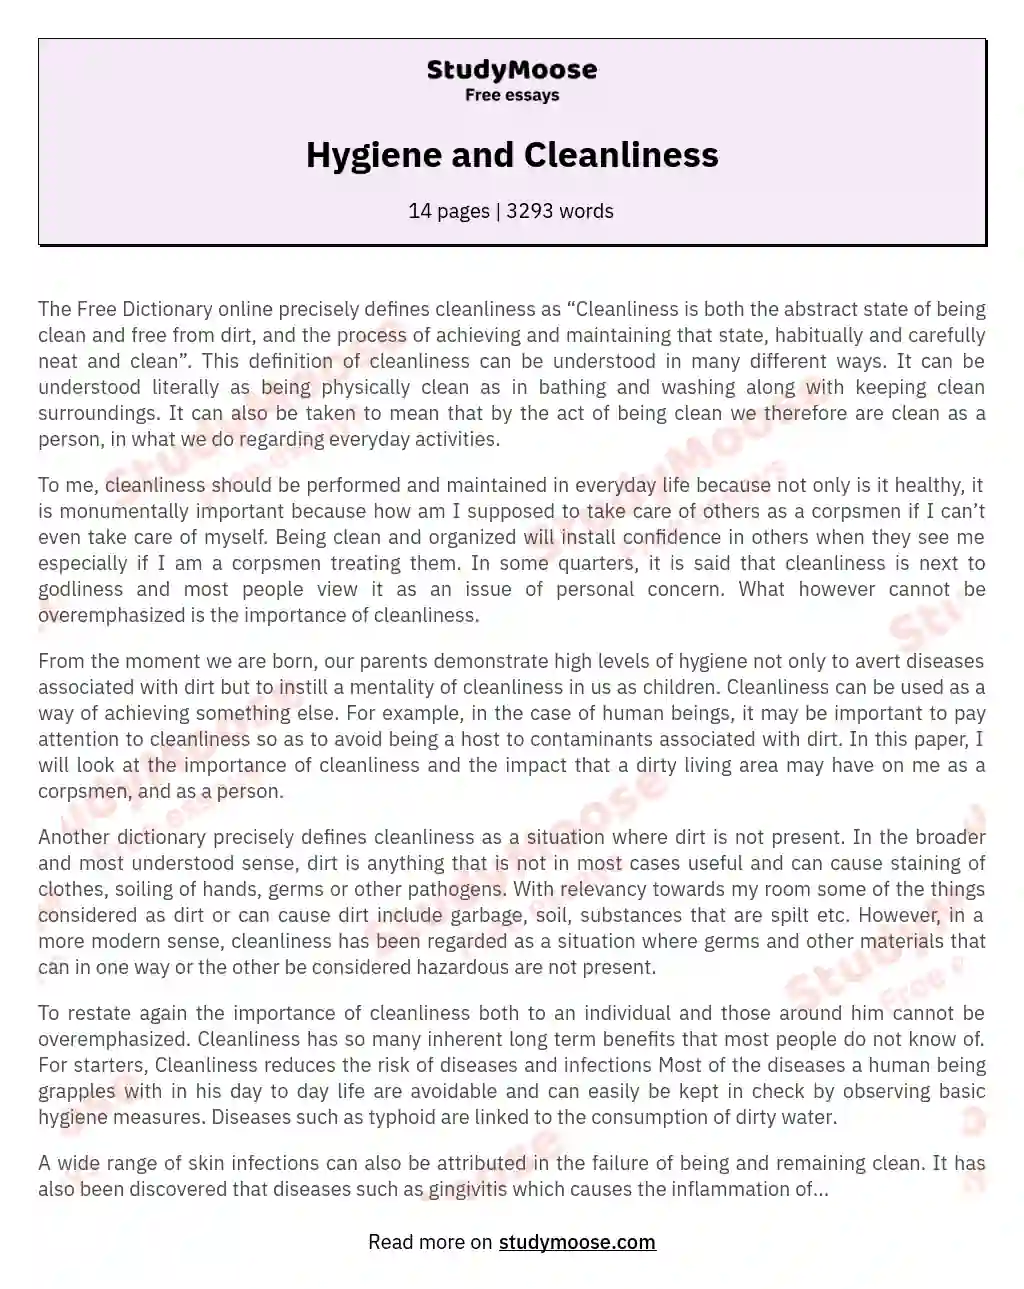 Hygiene and Cleanliness essay